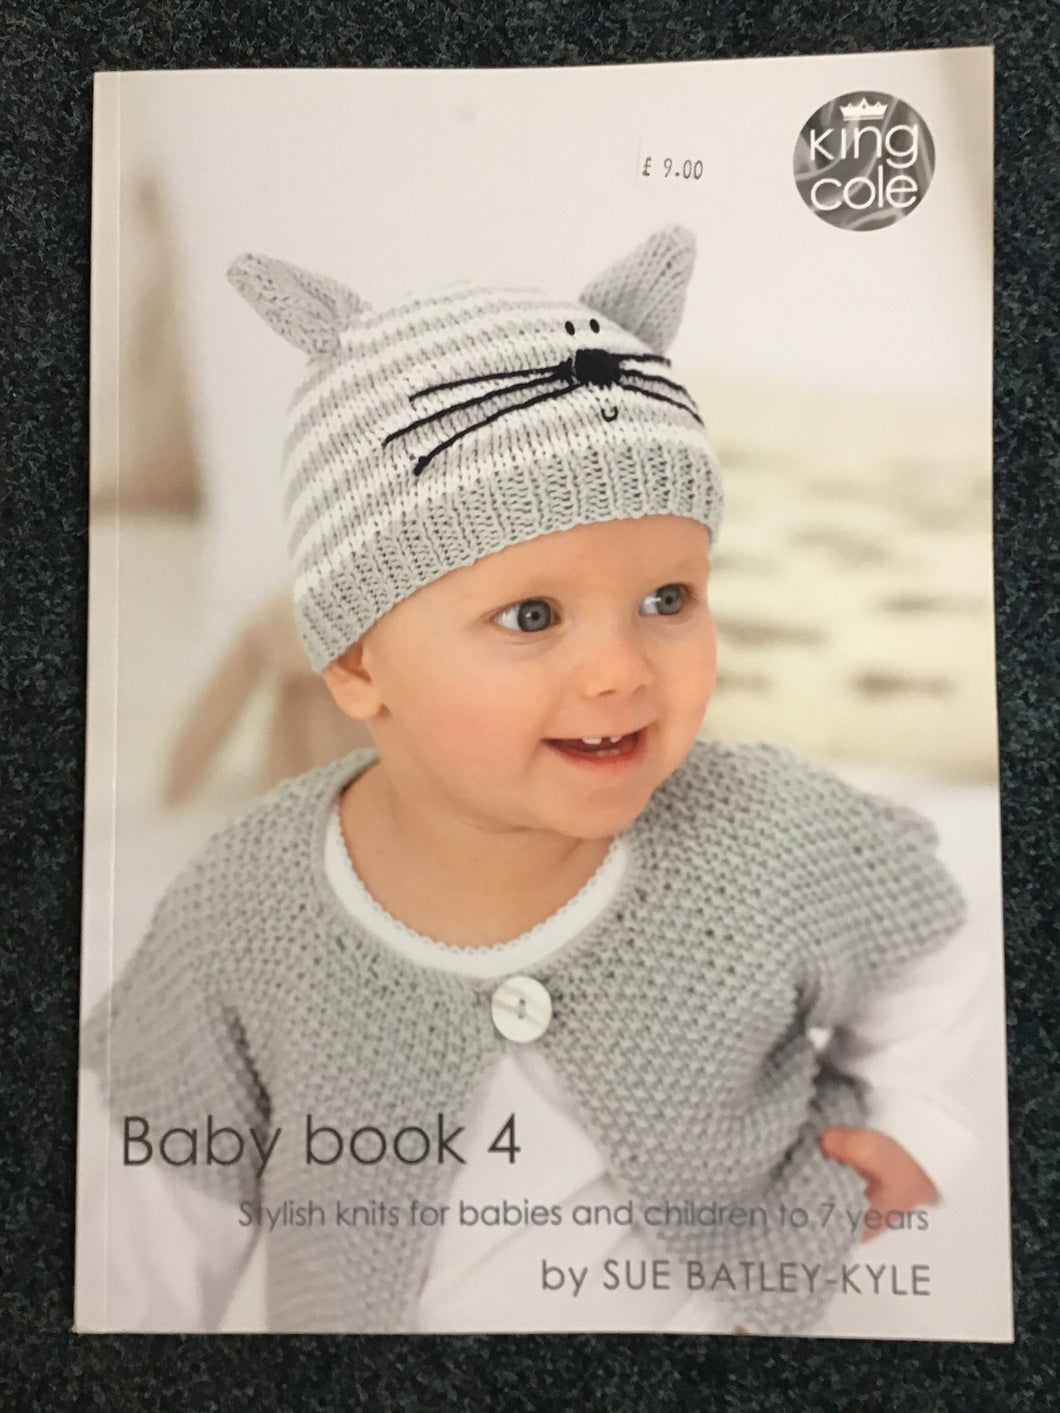 King Cole Baby Pattern Books